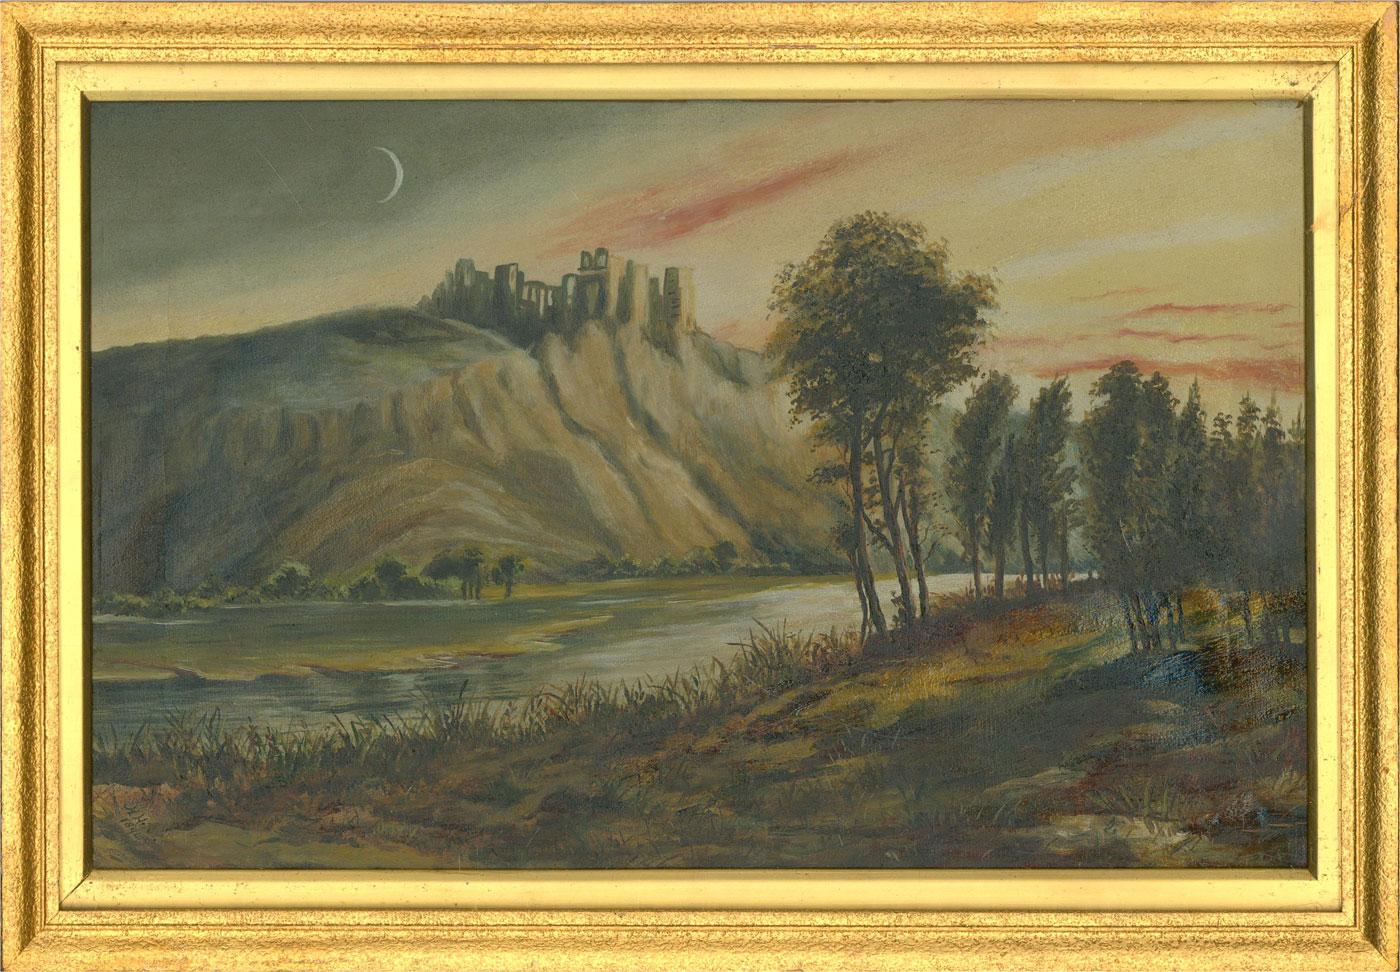 An ethereal landscape showing imposing ruins on a river side Hilltop under the blushing sky of gathering dusk. The artist has signed and dated to the lower left corner and the painting has been presented in a gilt frame with gilt slip. The artist